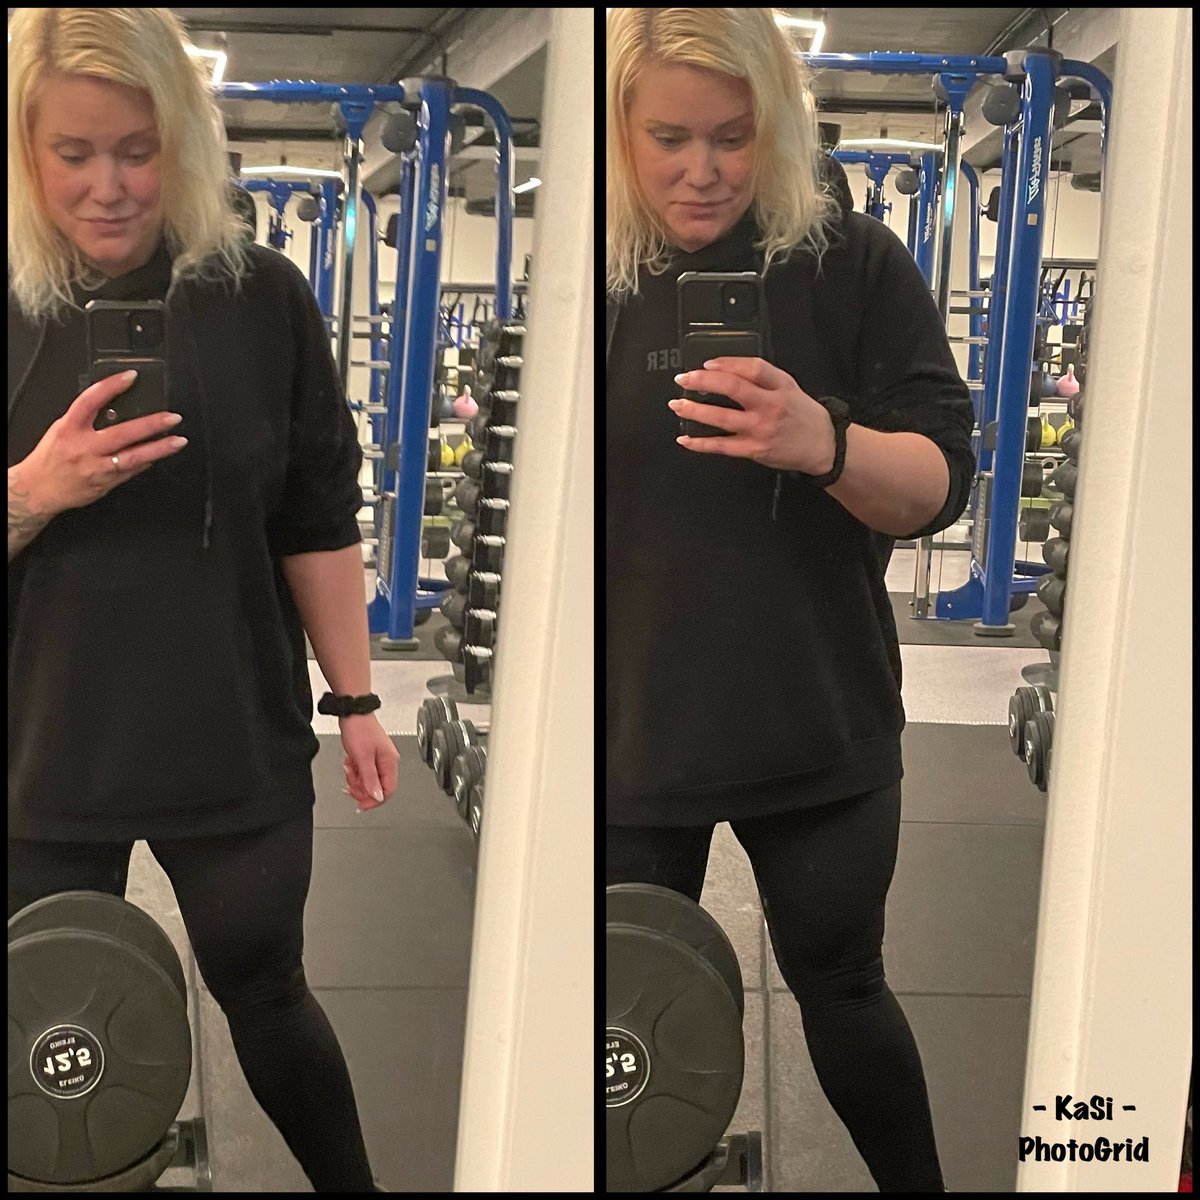 I had a great #legday 🙌 Can see a little #quad peeking out 😄 And then the rest of the week was ruined by a restaurant that messed up my order so that I ate #gluten 😤 Next week I only eat at home 😅 #girlswholift #celiacdisease